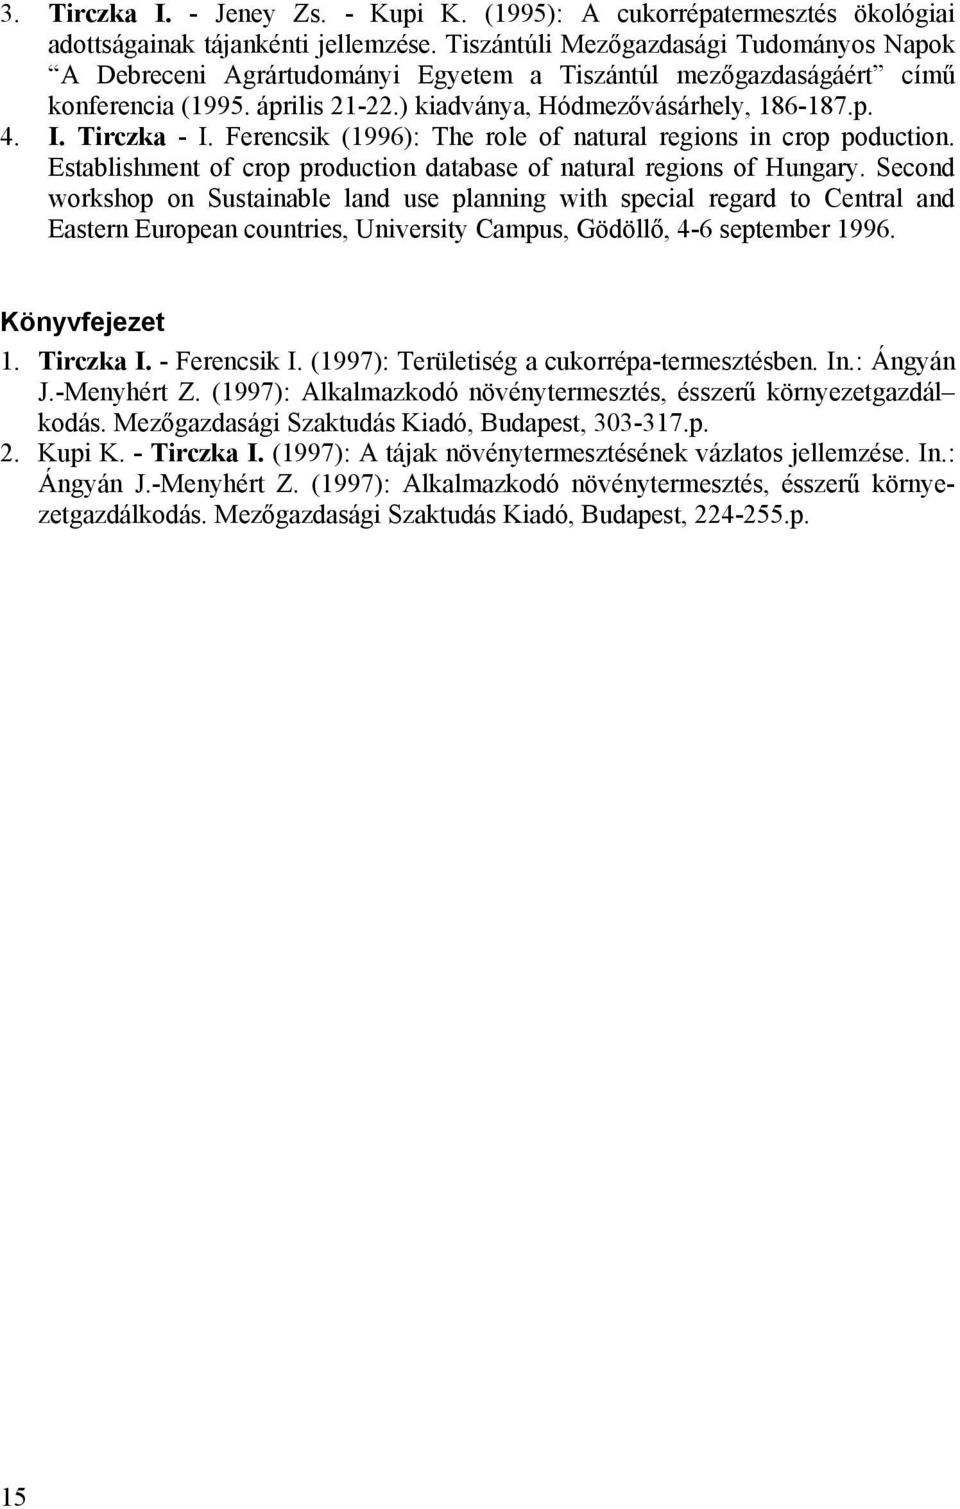 Tirczka - I. Ferencsik (1996): The role of natural regions in crop poduction. Establishment of crop production database of natural regions of Hungary.